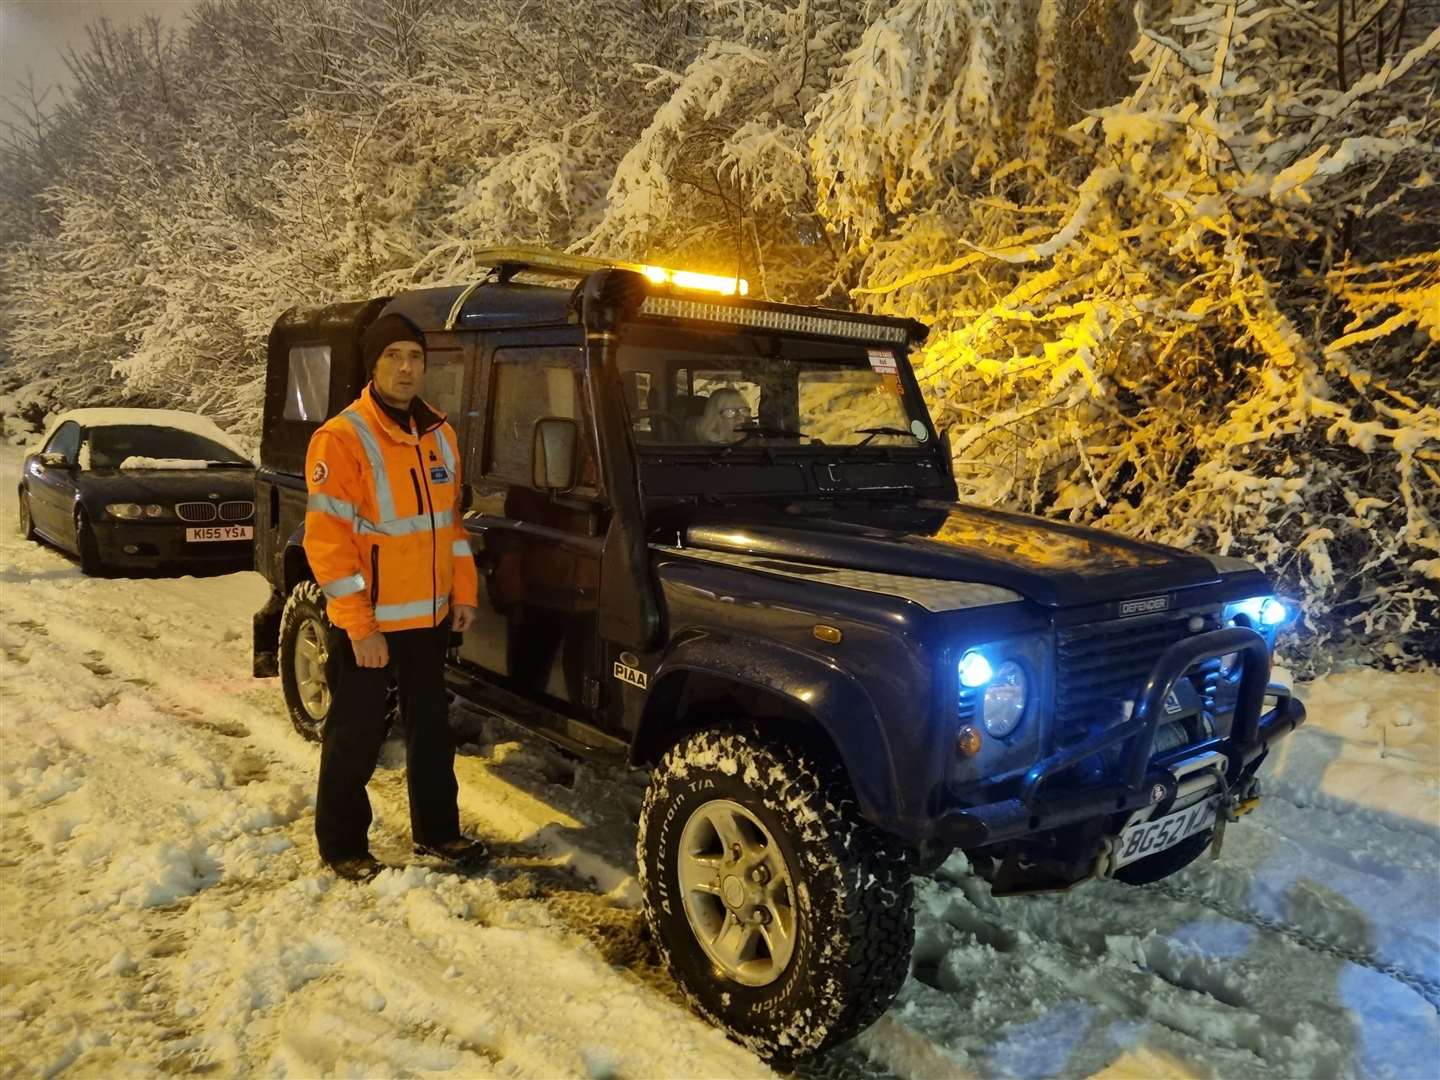 Members of South East 4x4 Response worked through the night Picture: UKNIP